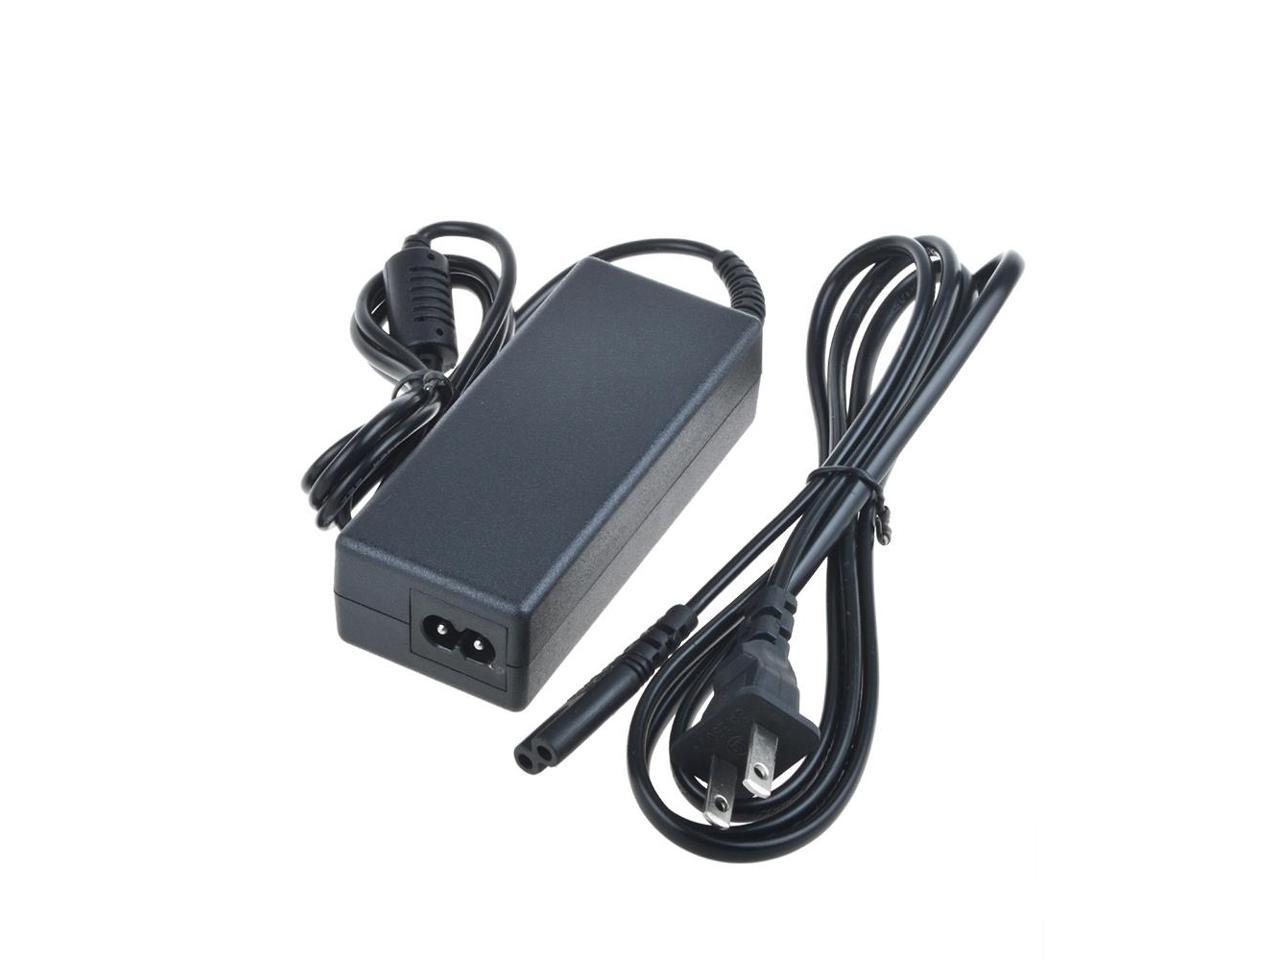 AC Power Adapter Power Supply for ACER curved ED273 wmidx 27" 16:9 LCD Monitor 